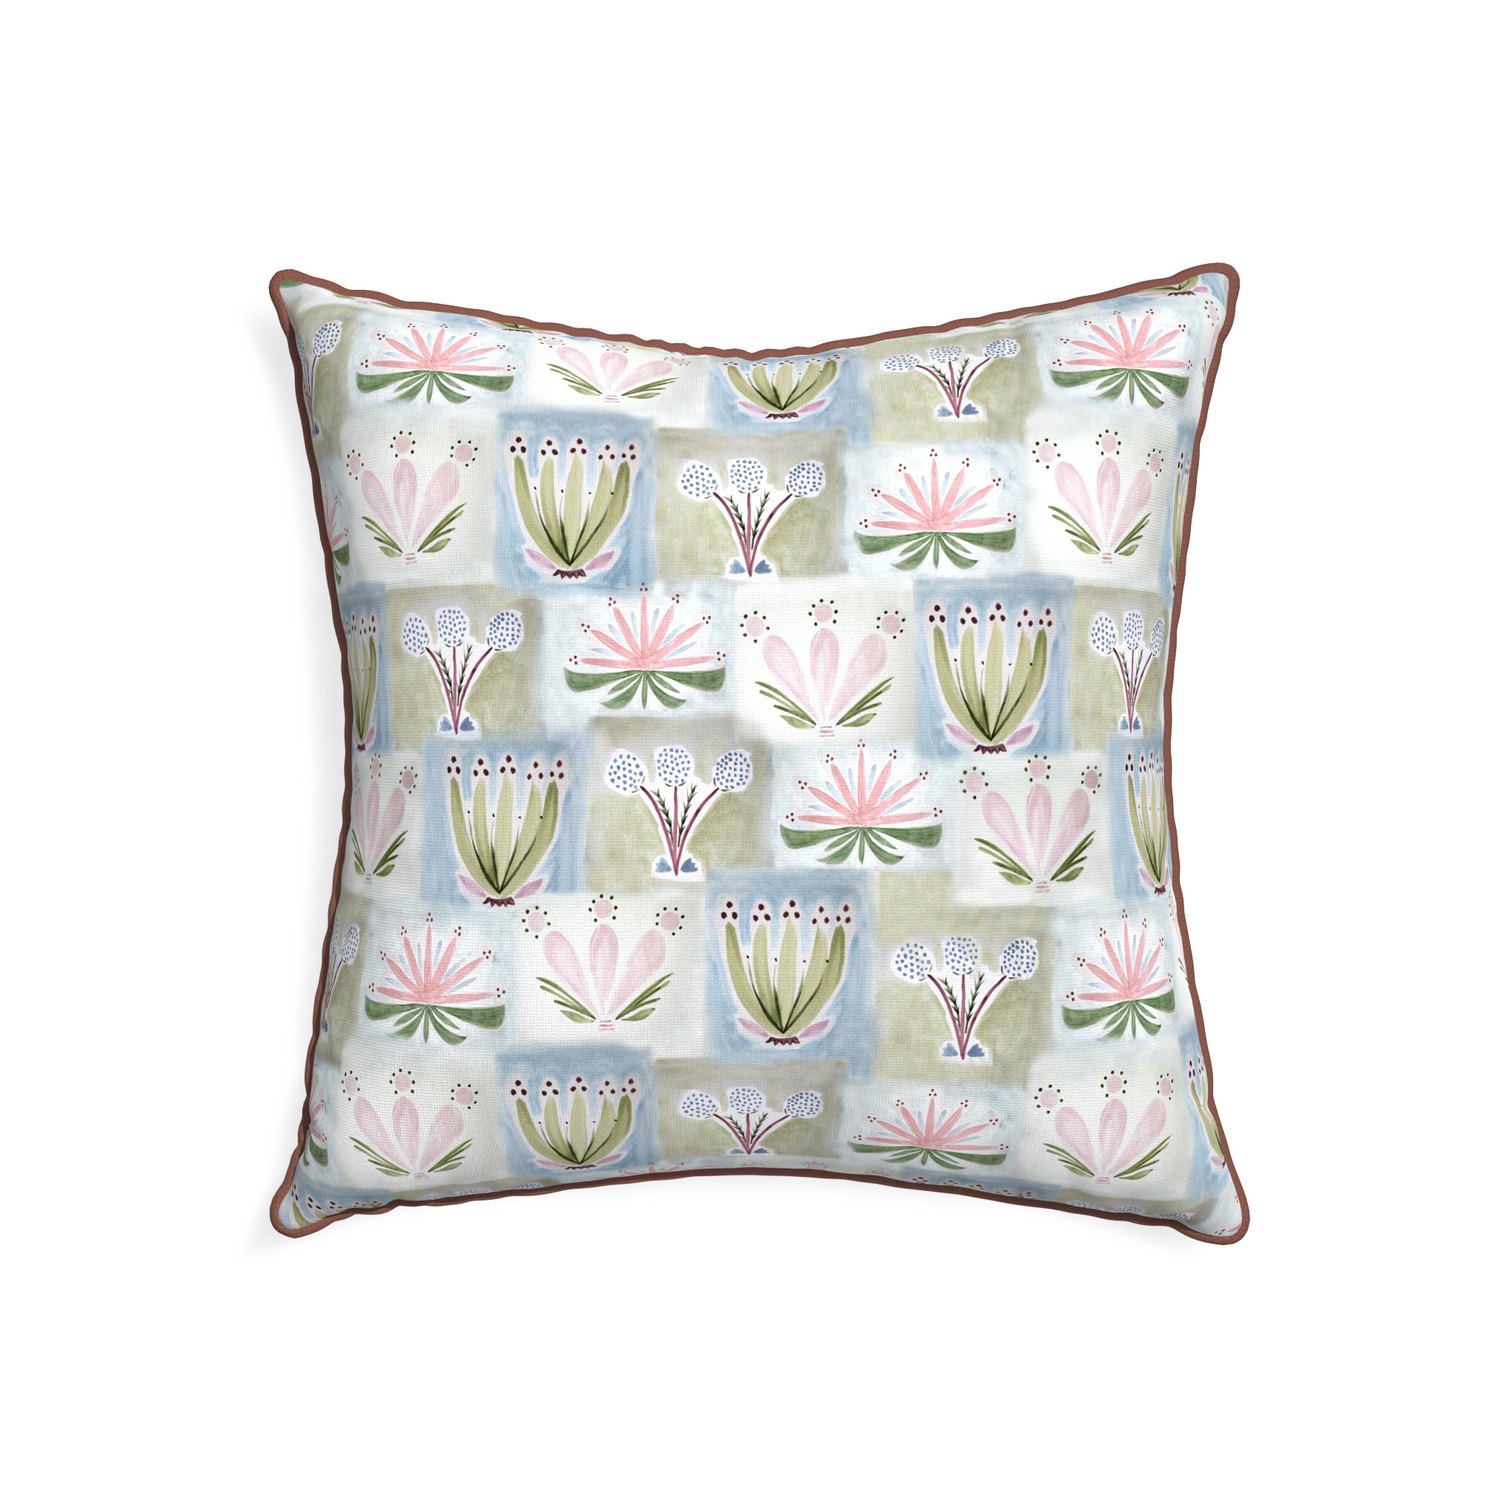 22-square harper custom hand-painted floralpillow with w piping on white background